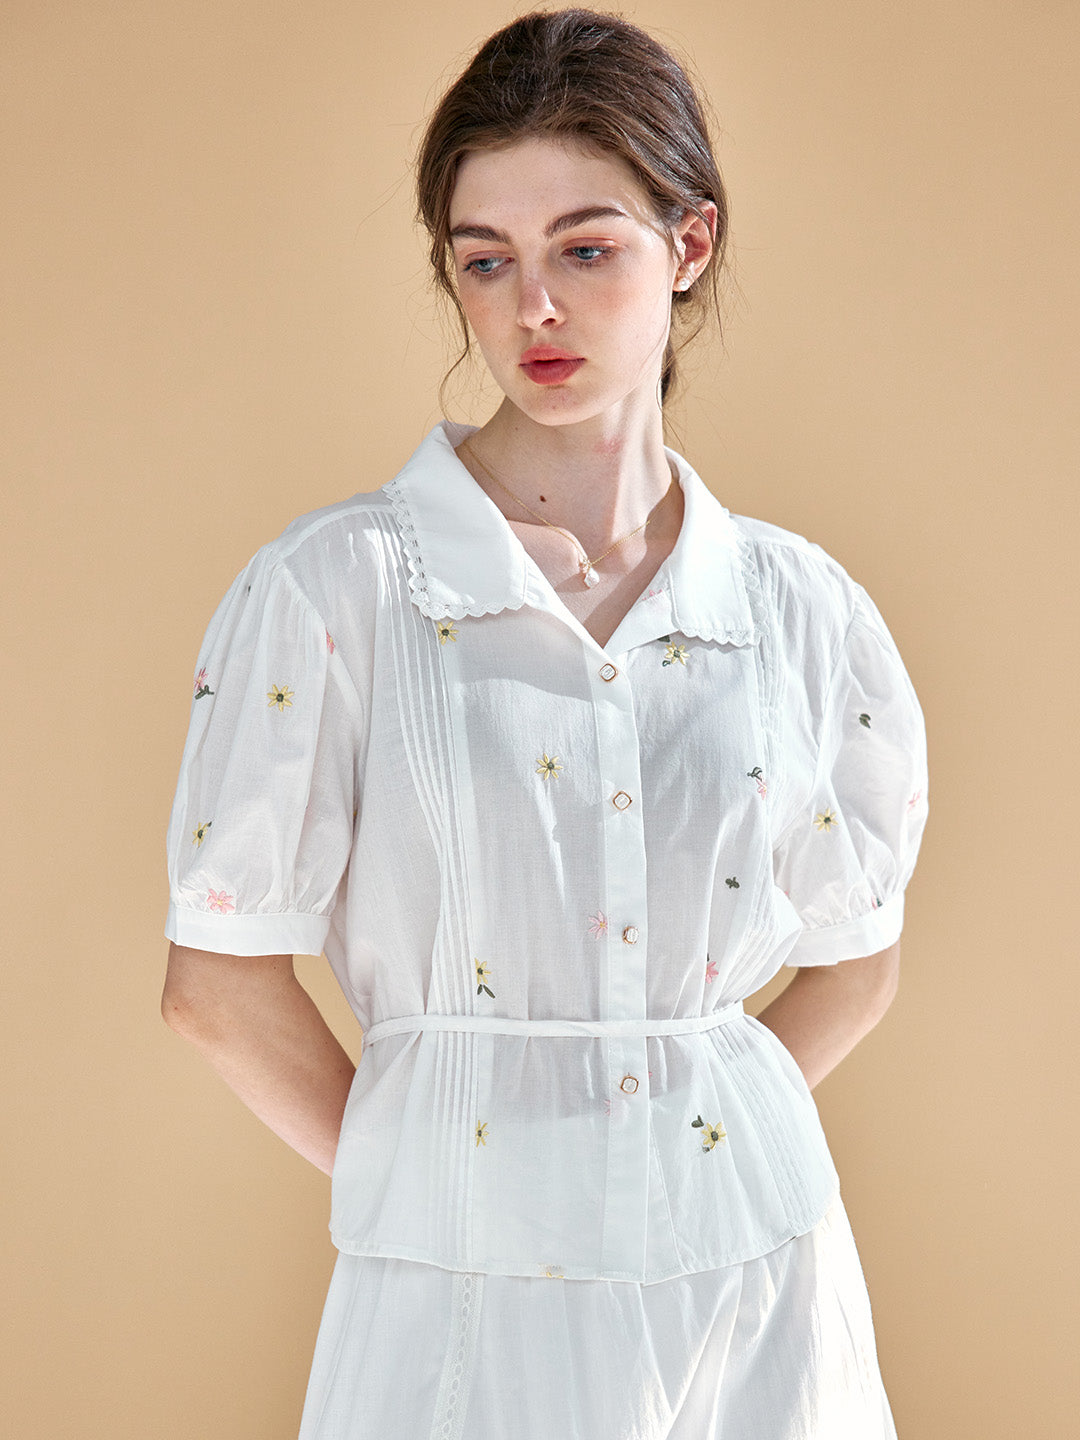 【Final Sale】Savanna Simple Little Daisy Embroidered White Blouse